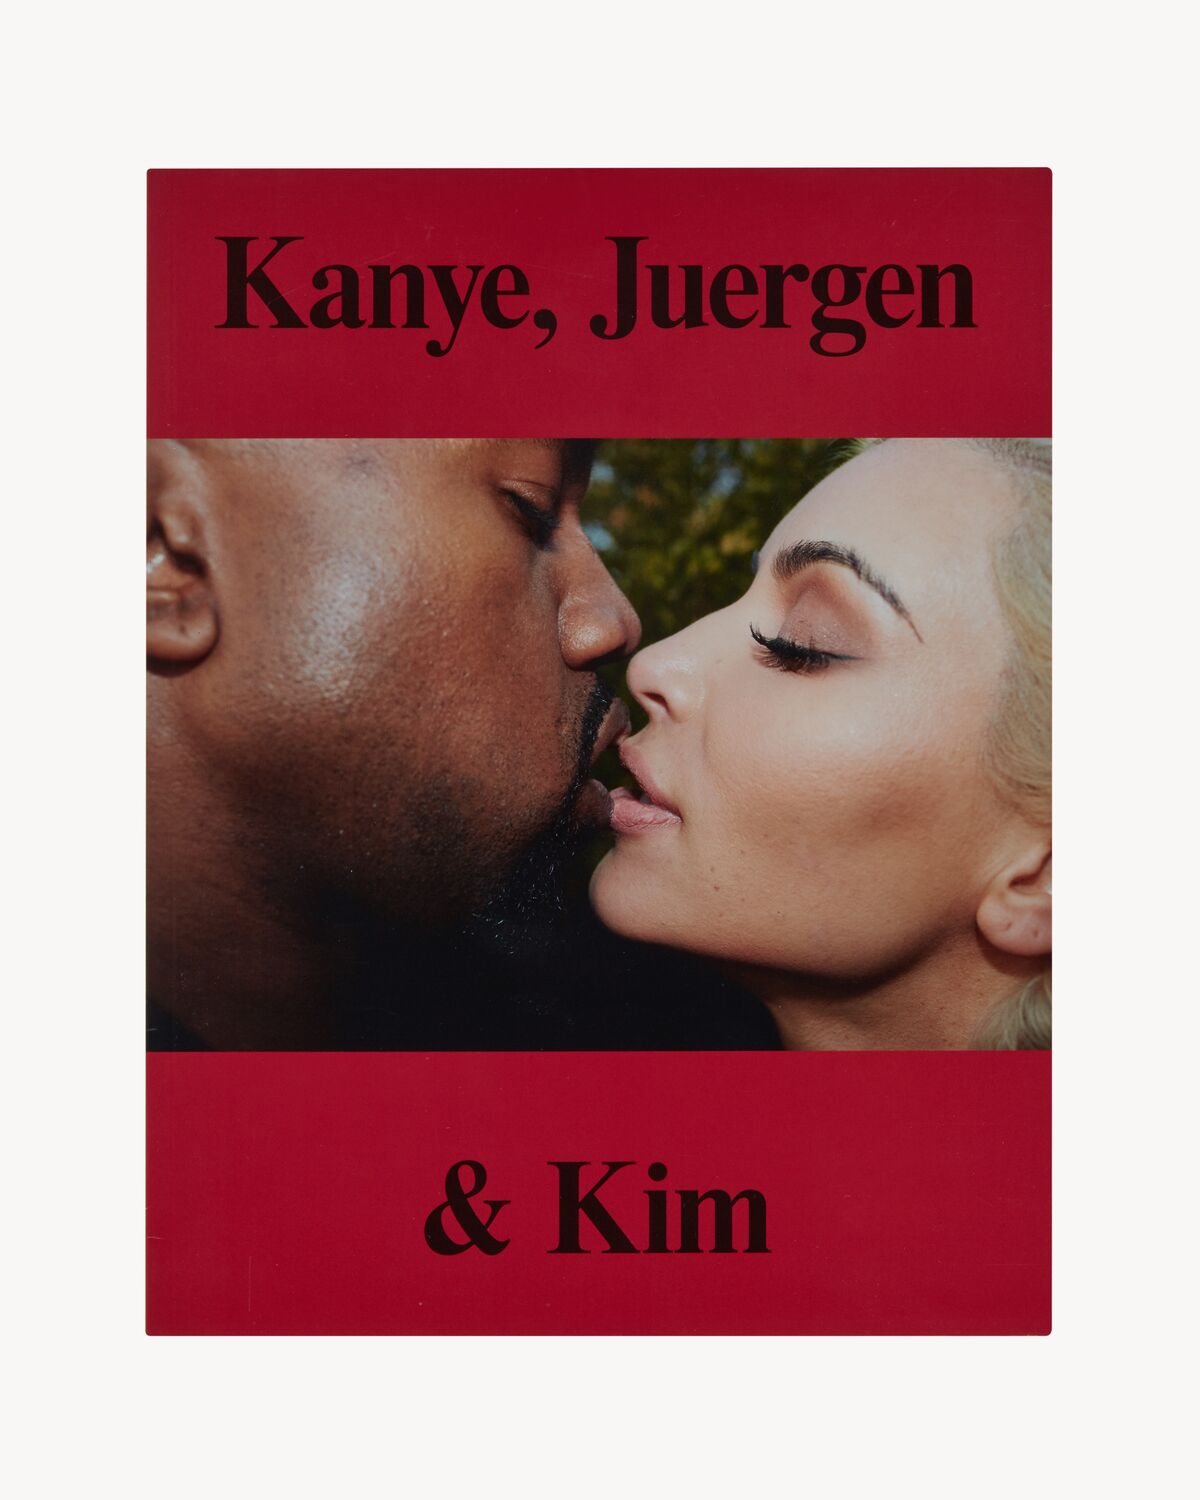 KANYE, JUERGEN AND KIM